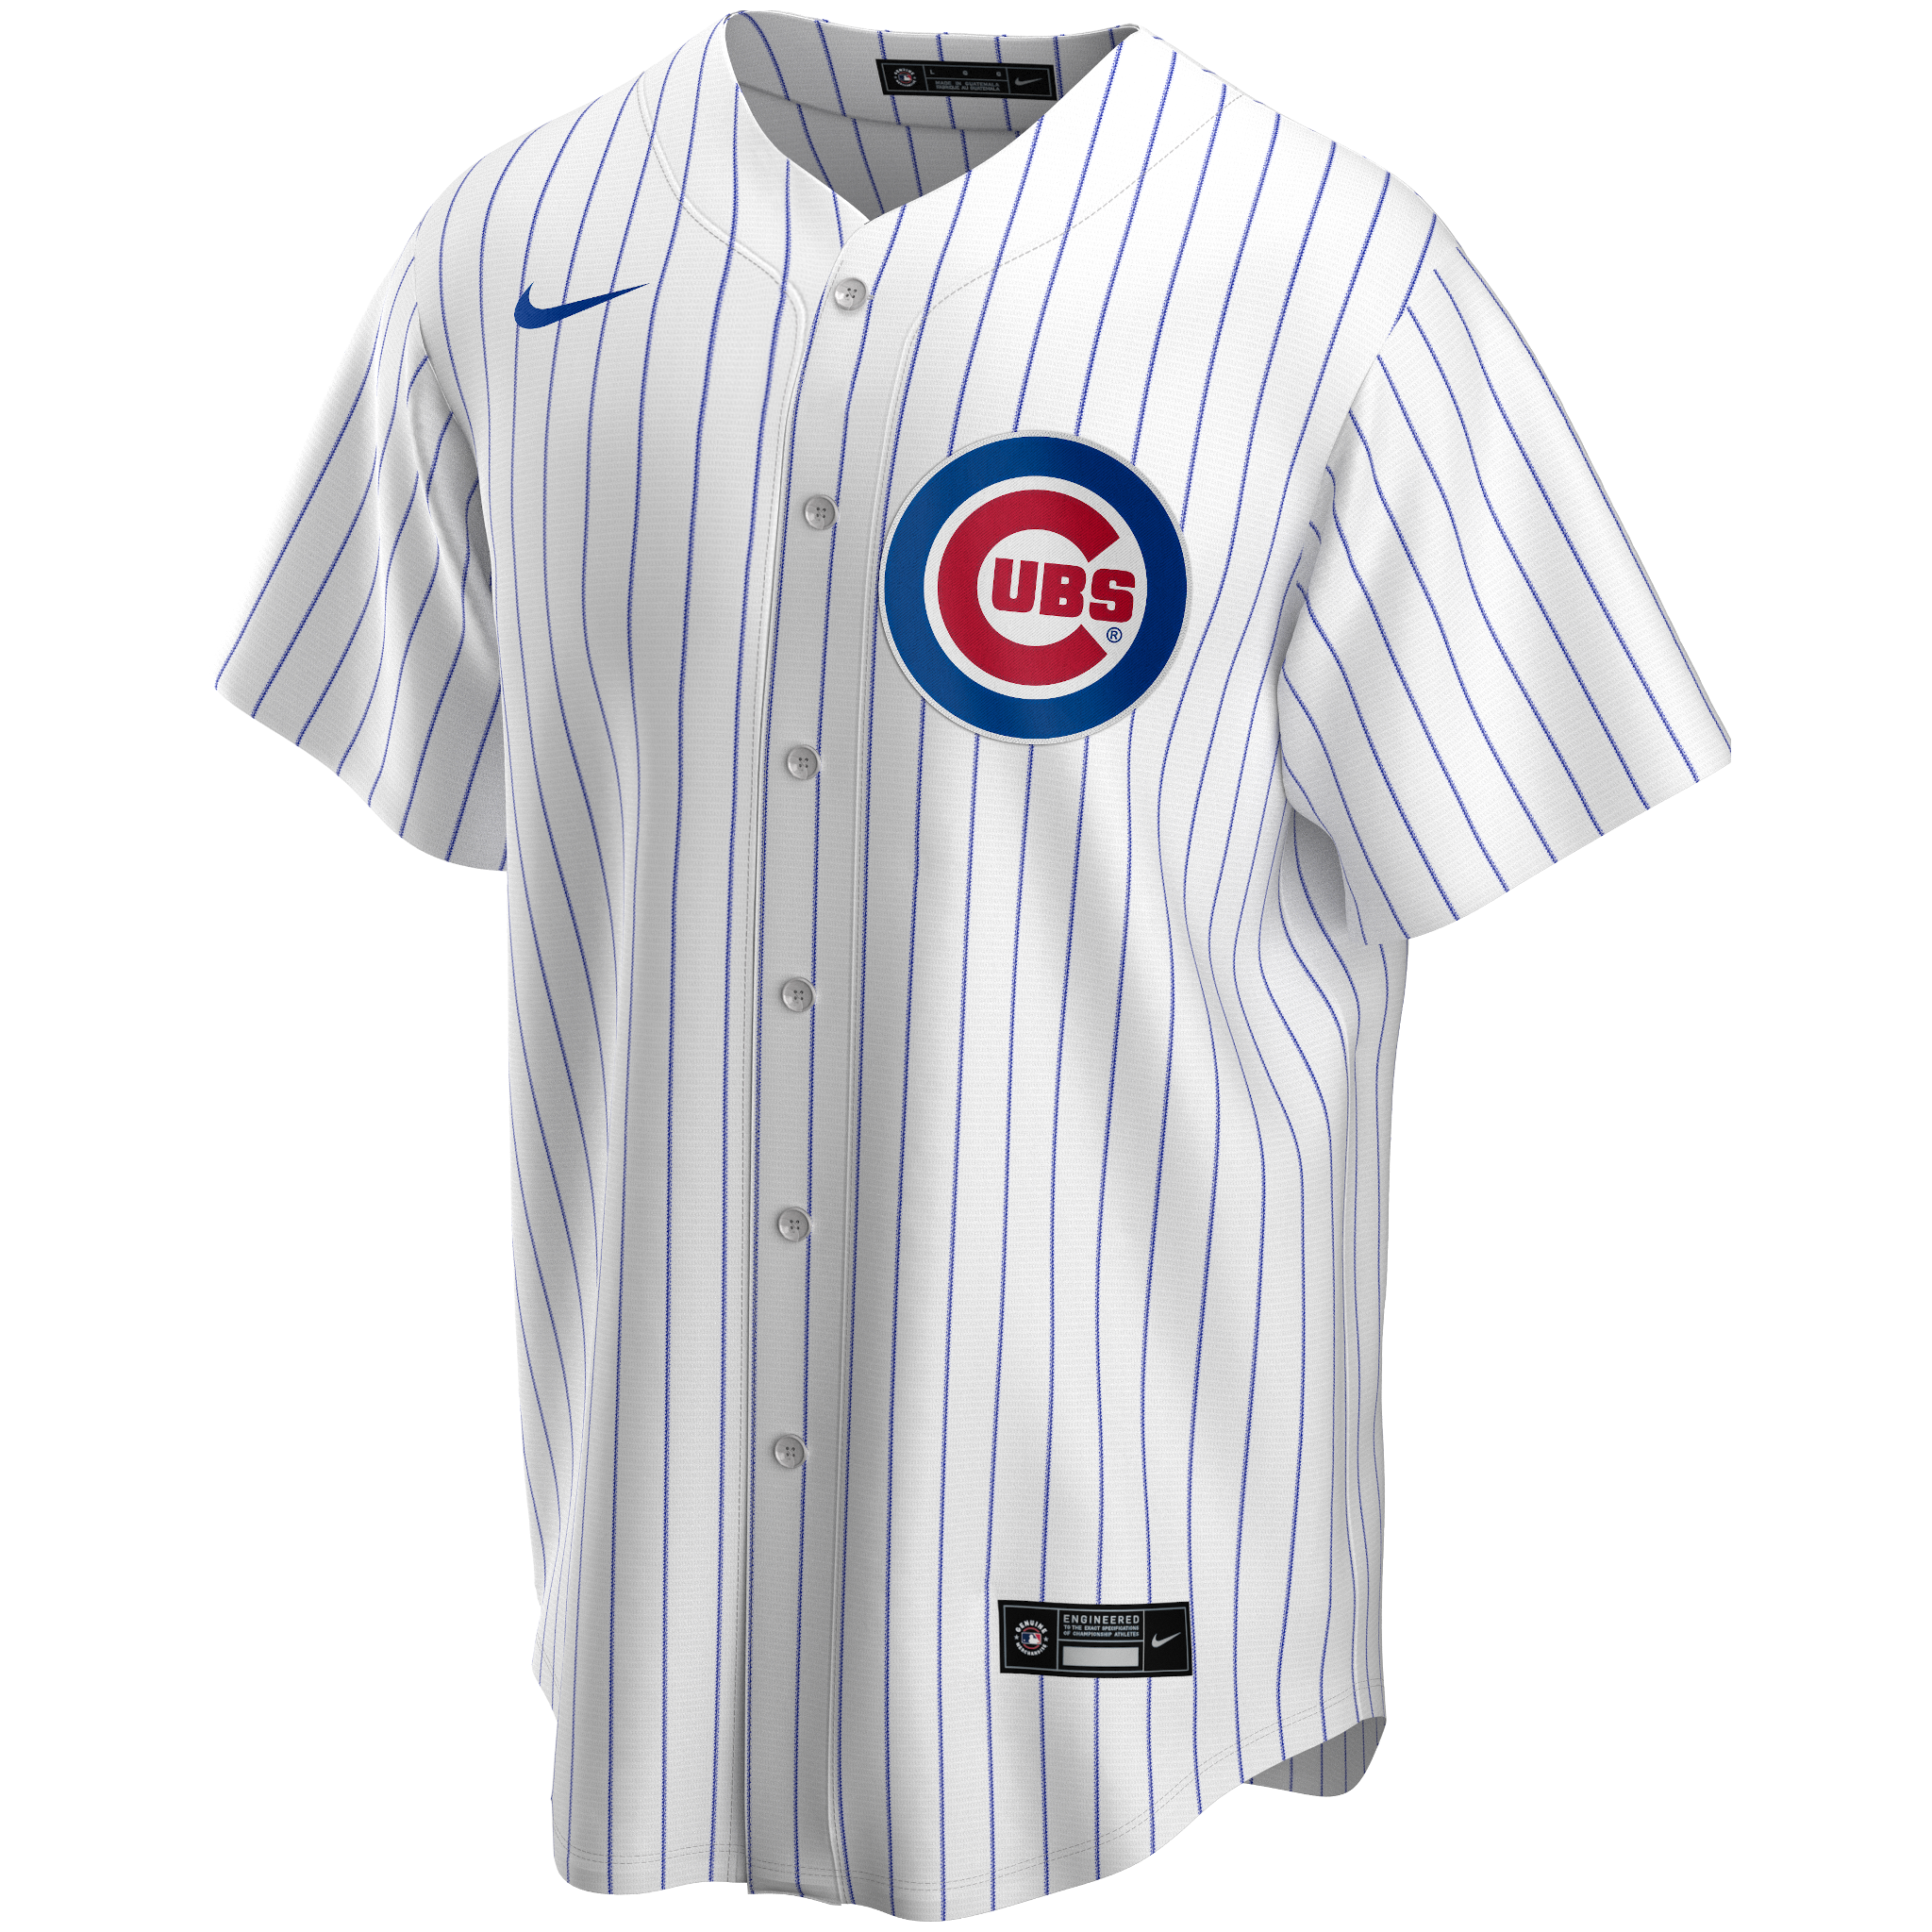 youth cubs baez jersey